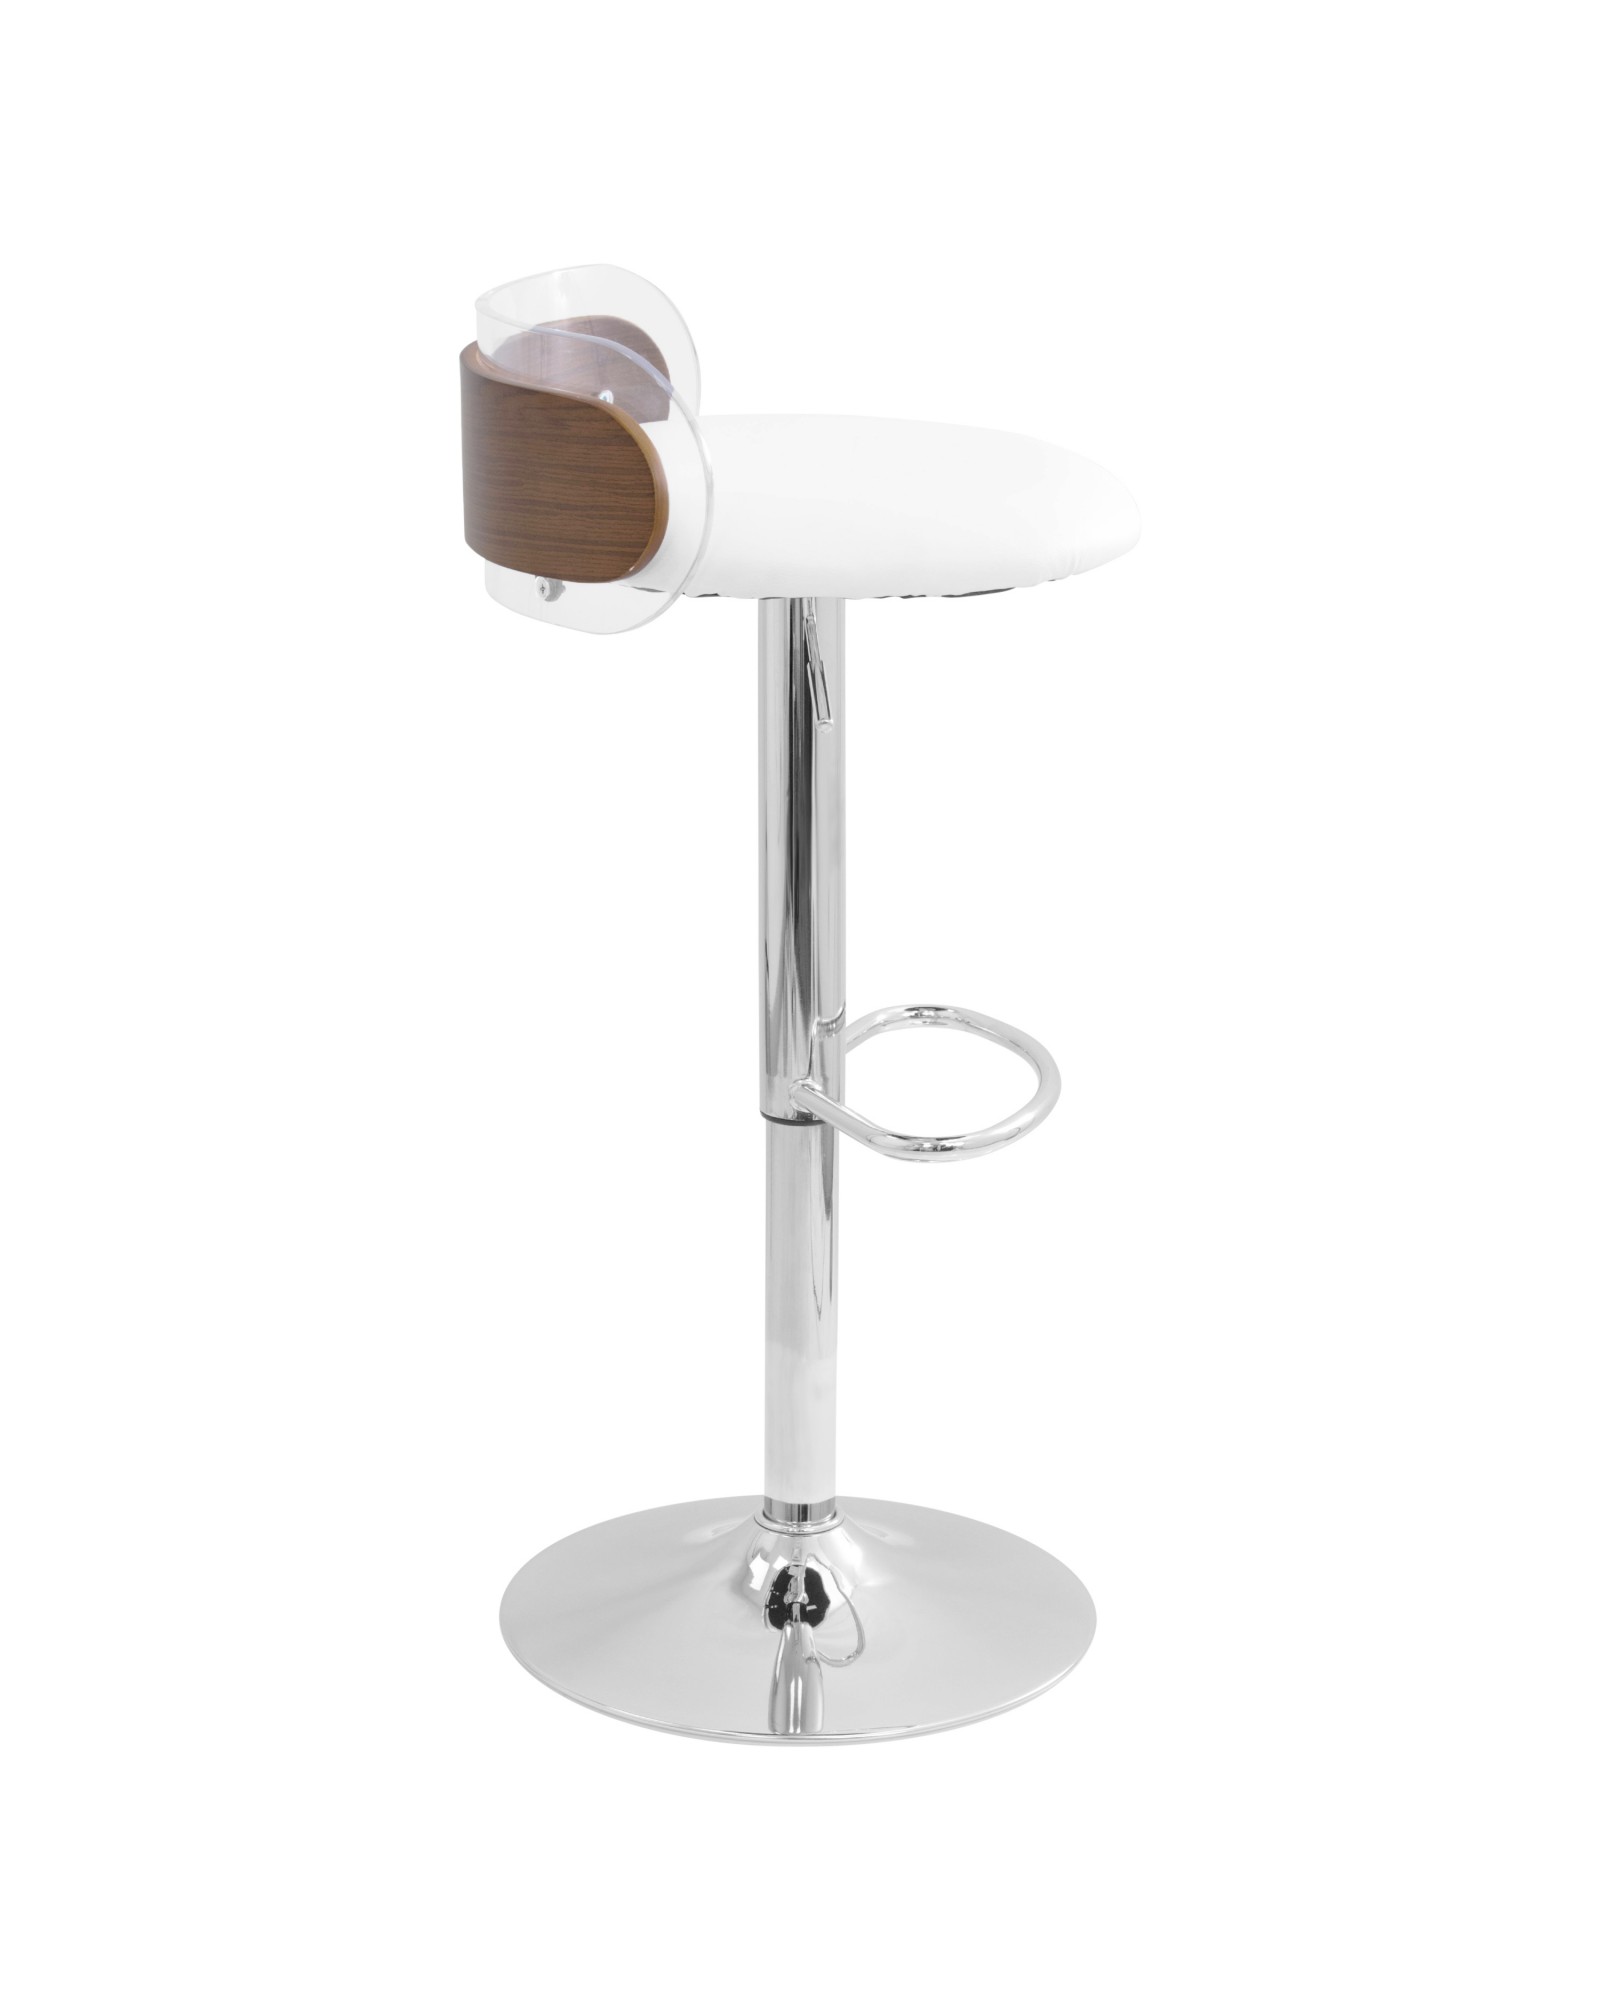 Arc Contemporary Adjustable Barstool in Walnut Wood, Clear Acrylic, and White Faux Leather